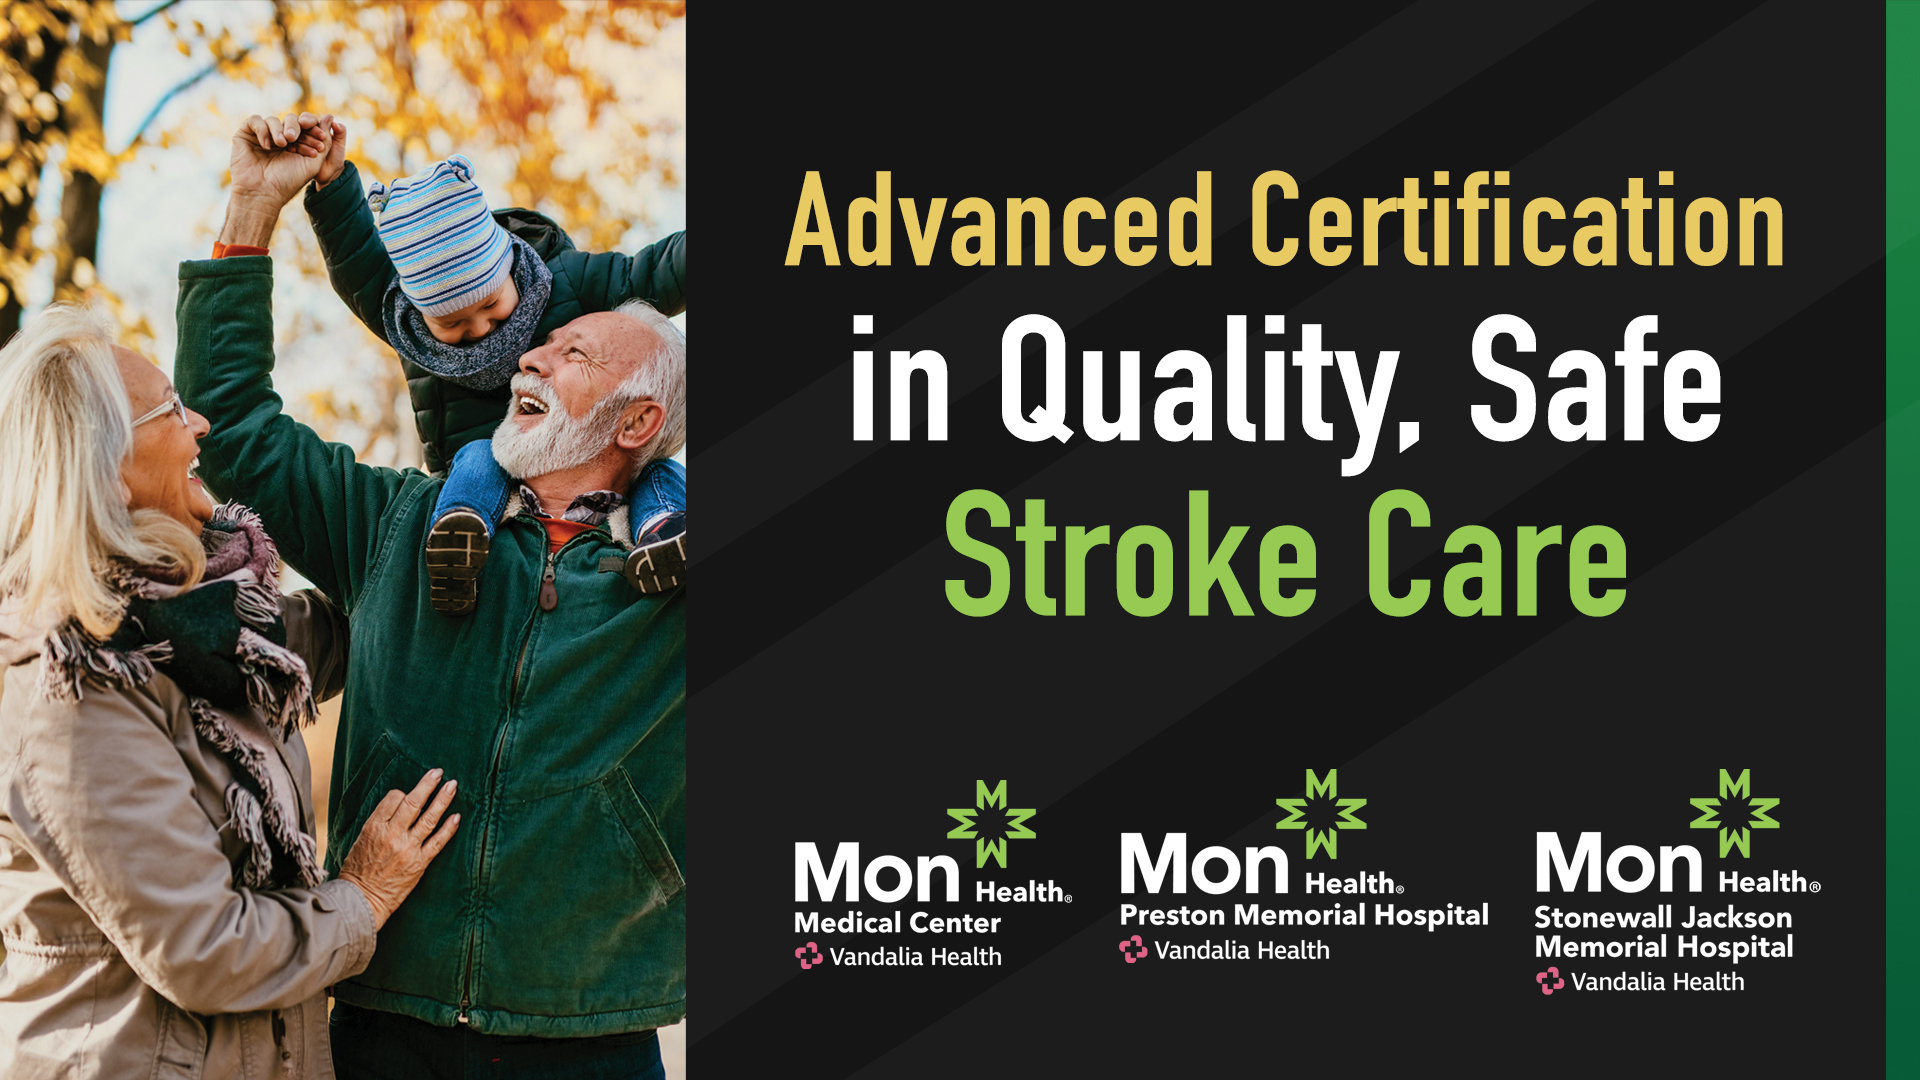 Mon Health System Hospitals Earn Advanced Certification in Quality, Safe Stroke Care